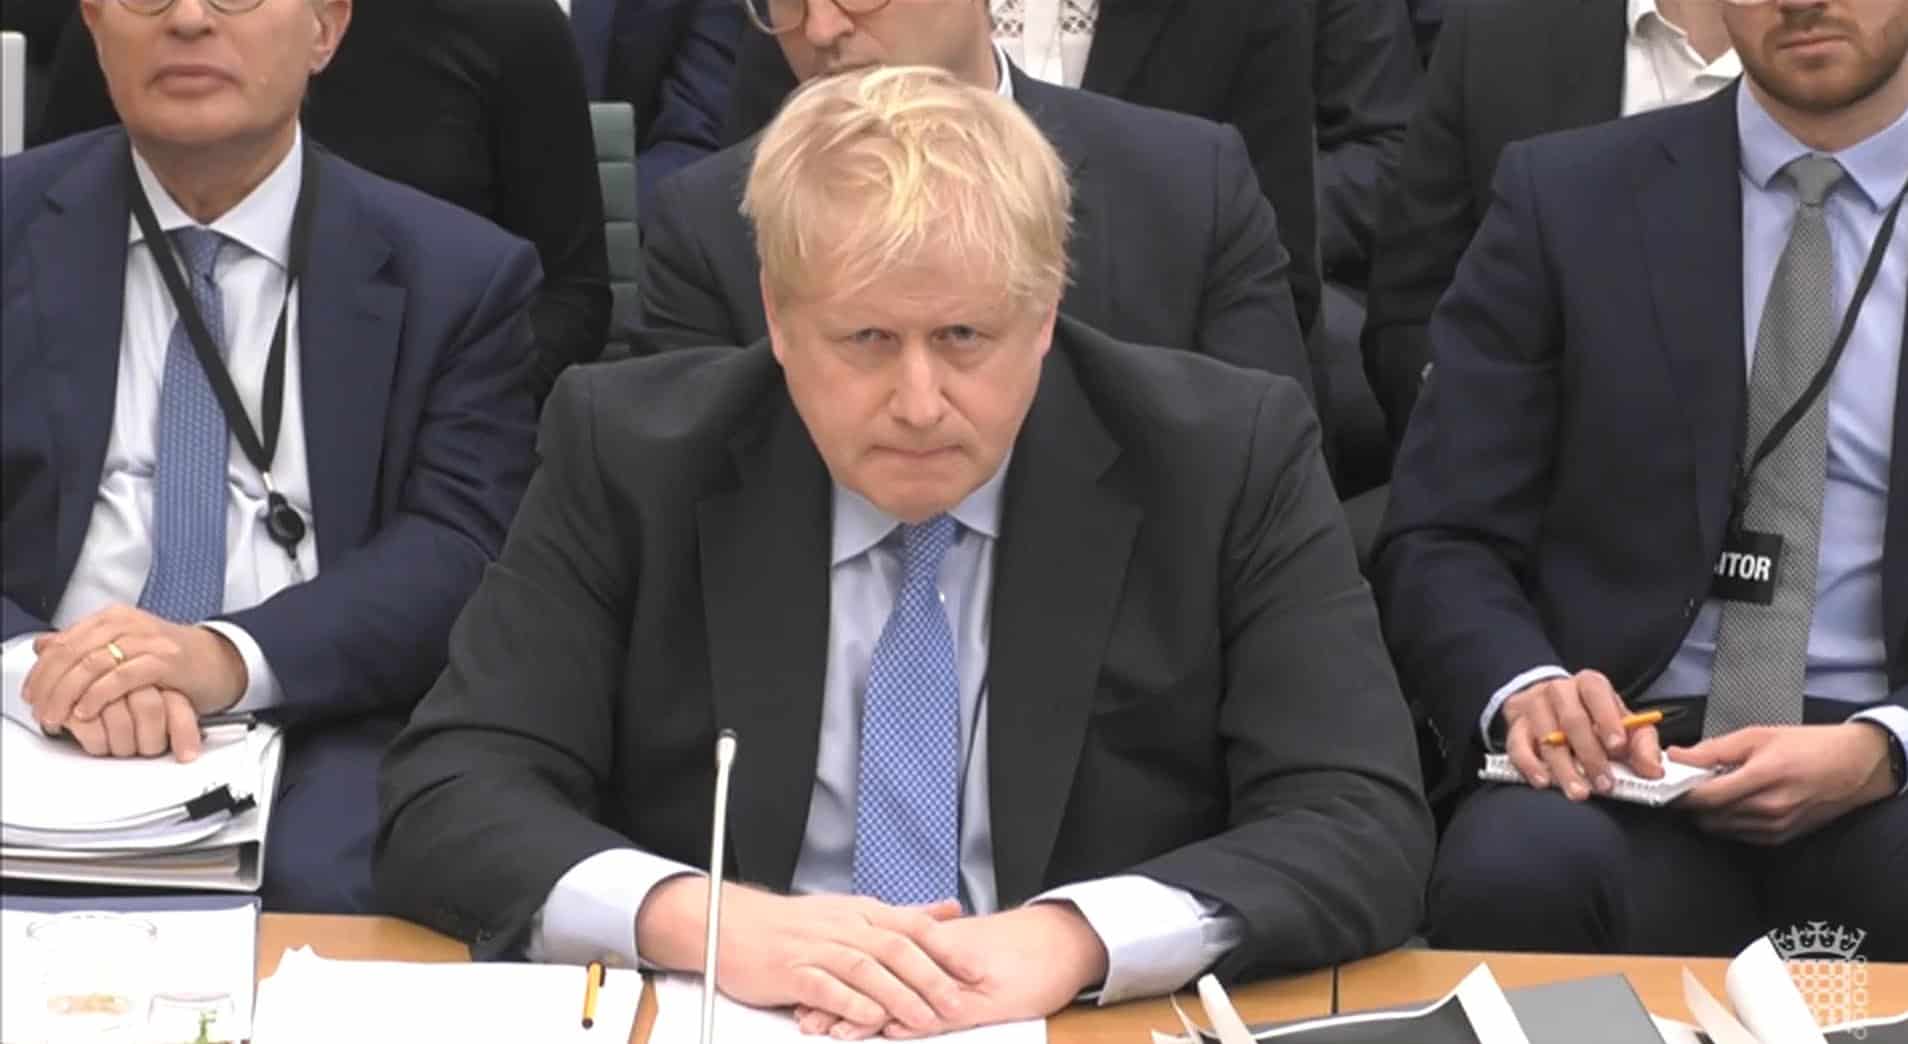 Hand on heart, I did not lie to the House, Johnson says